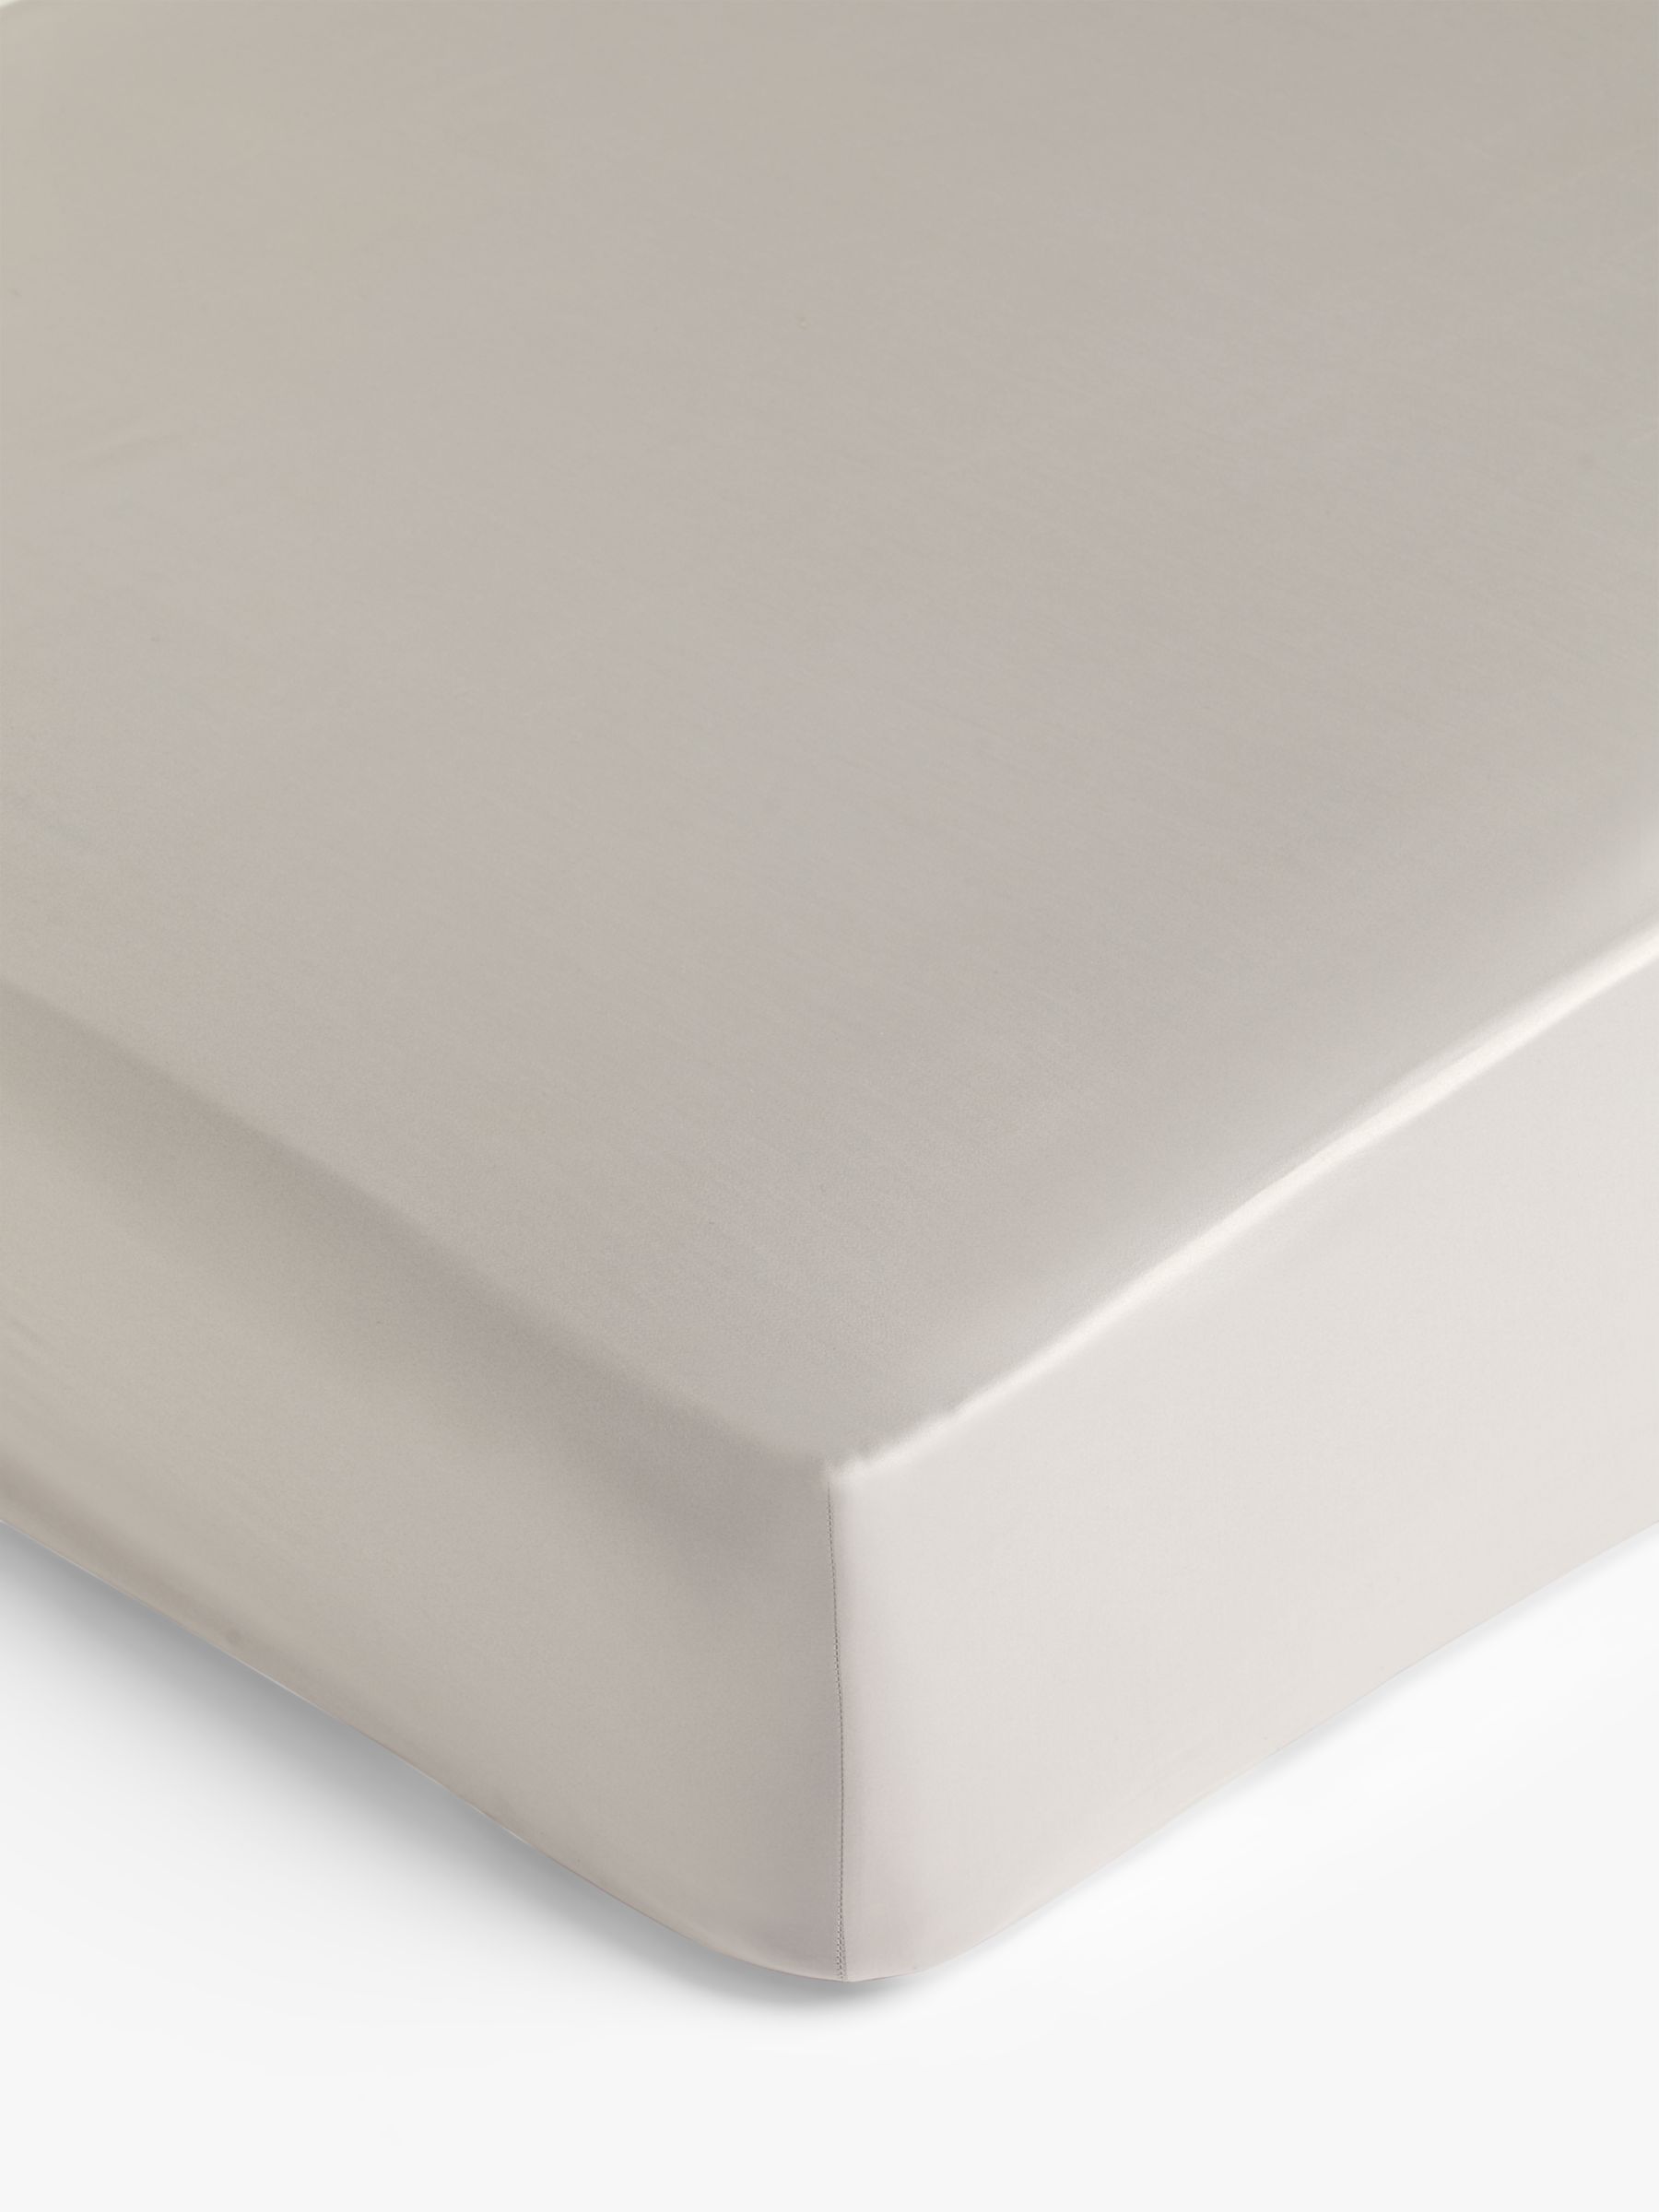 Percale Sheets | John Lewis & Partners